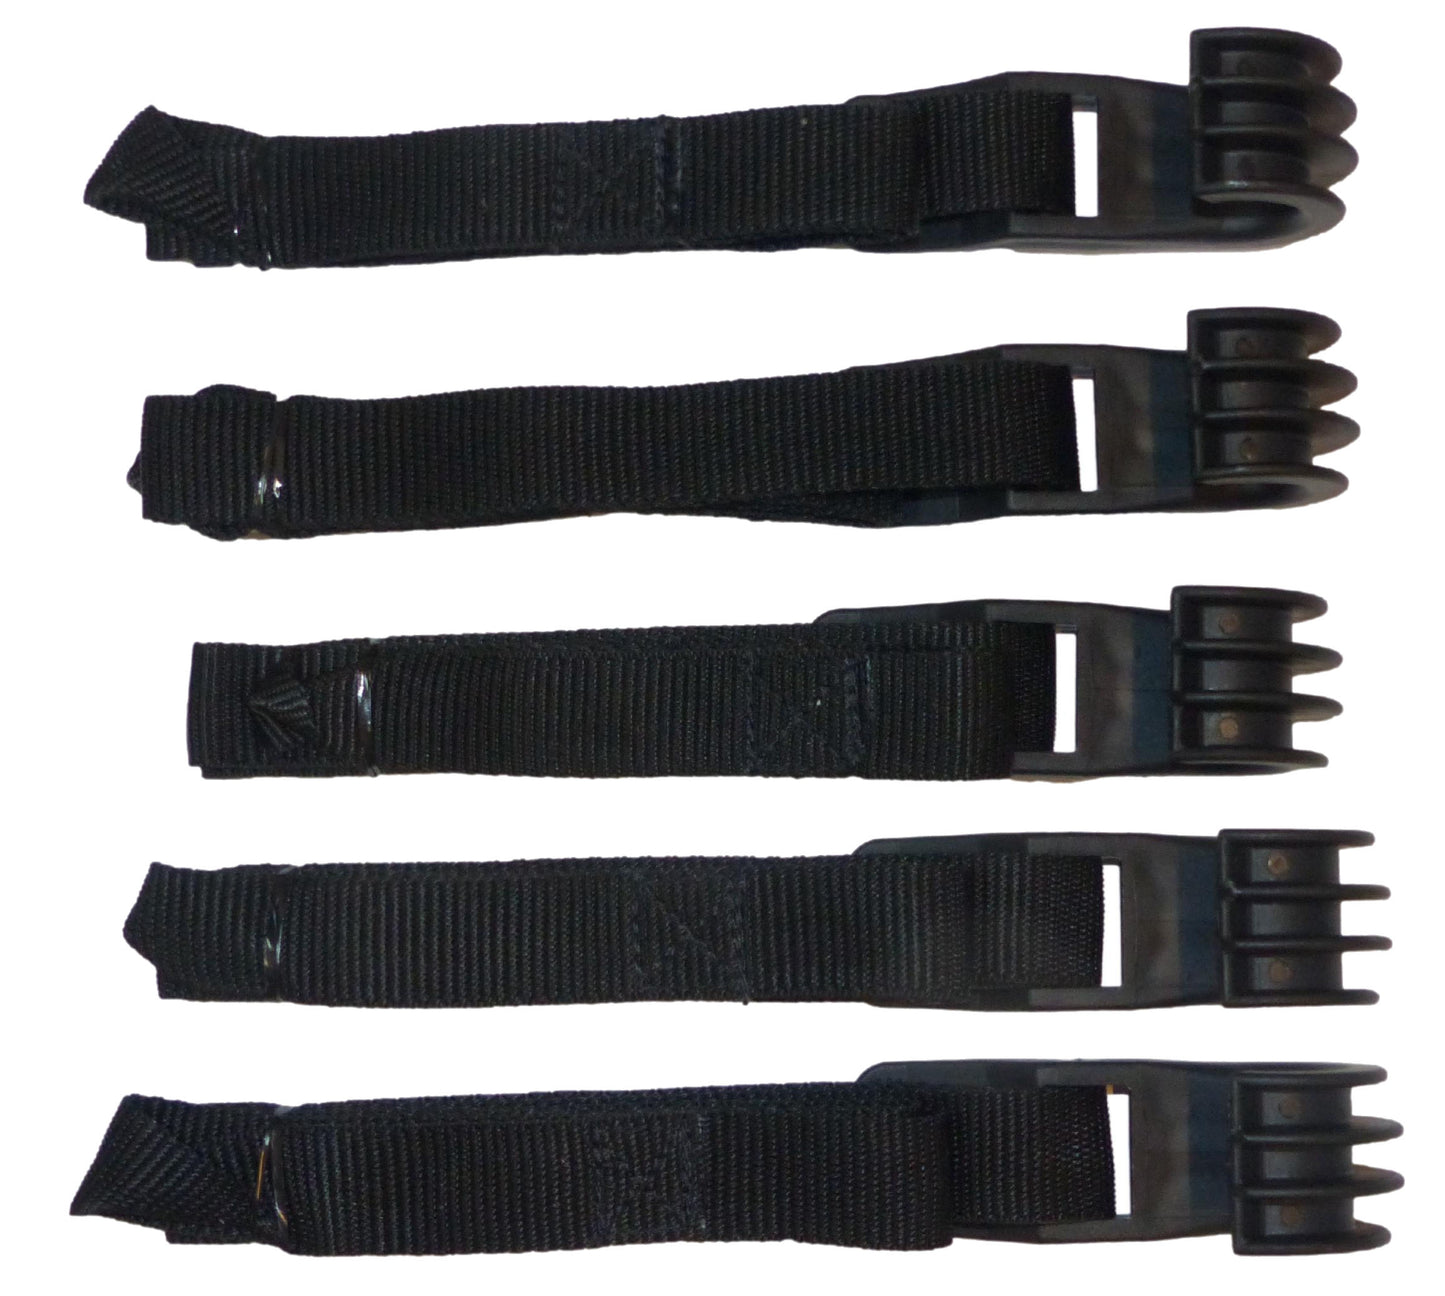 Benristraps Roll Cage, Trolley, Pallet Straps (Pack of 5) in black